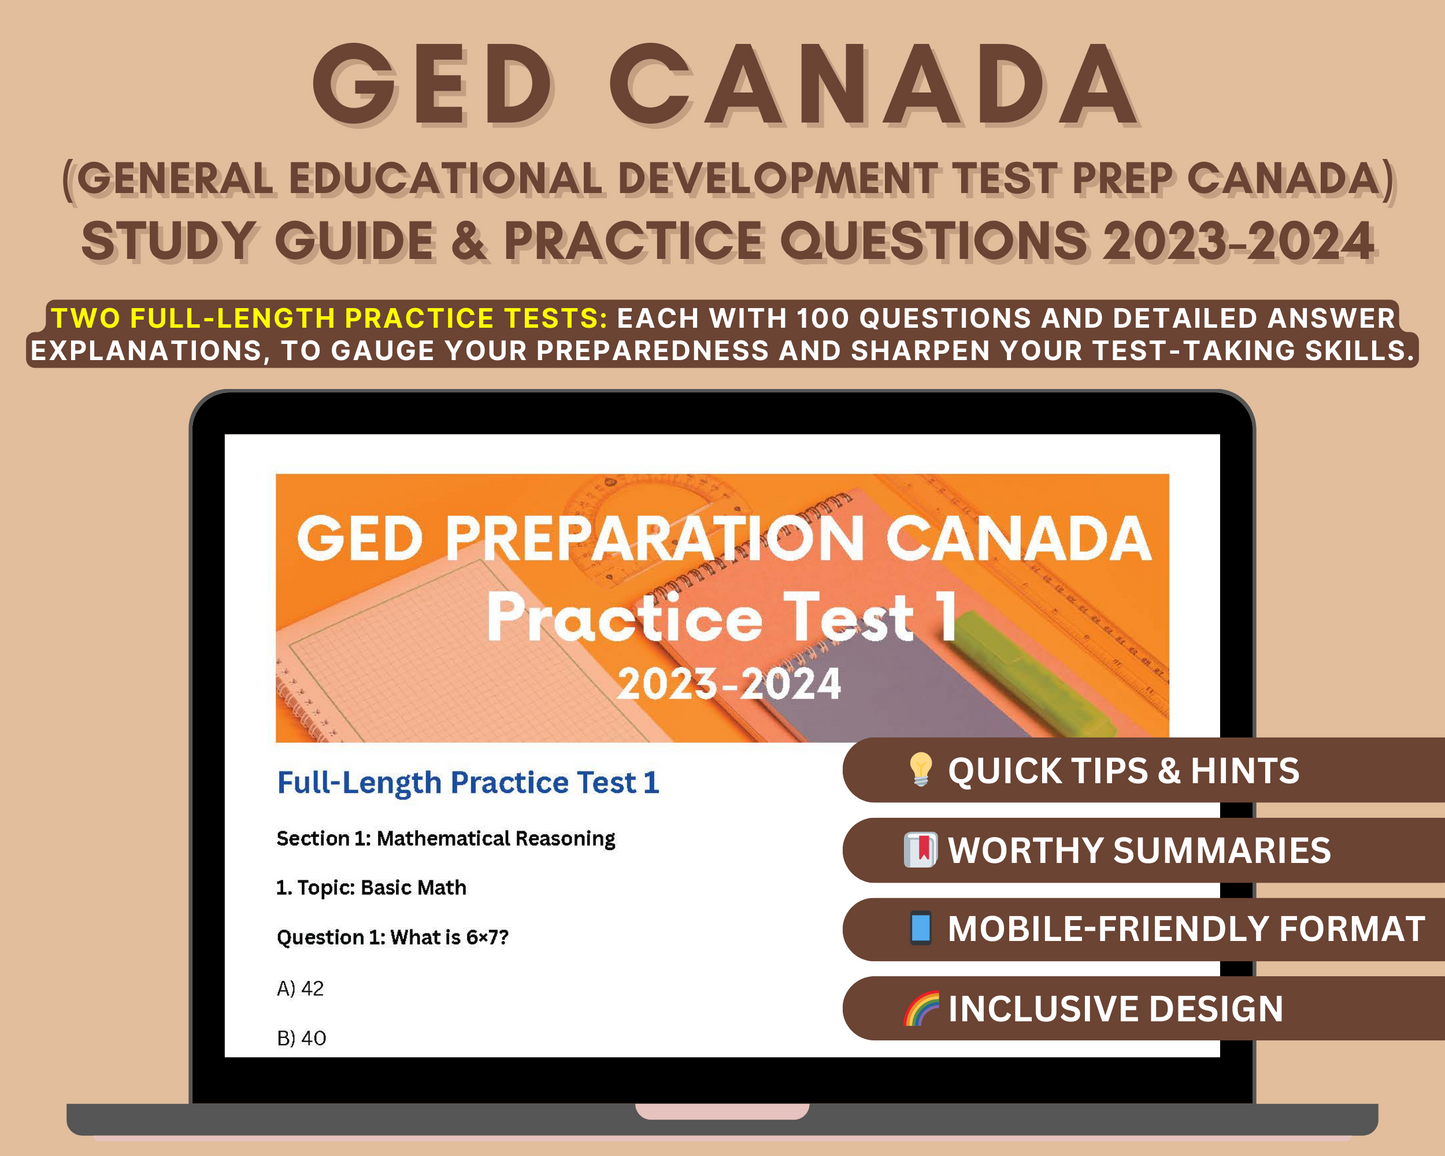 GED Canada Study Guide 2023-2024: In-Depth Content Review, Practice Tests & Exam Strategies to Boost Your GED Scores!